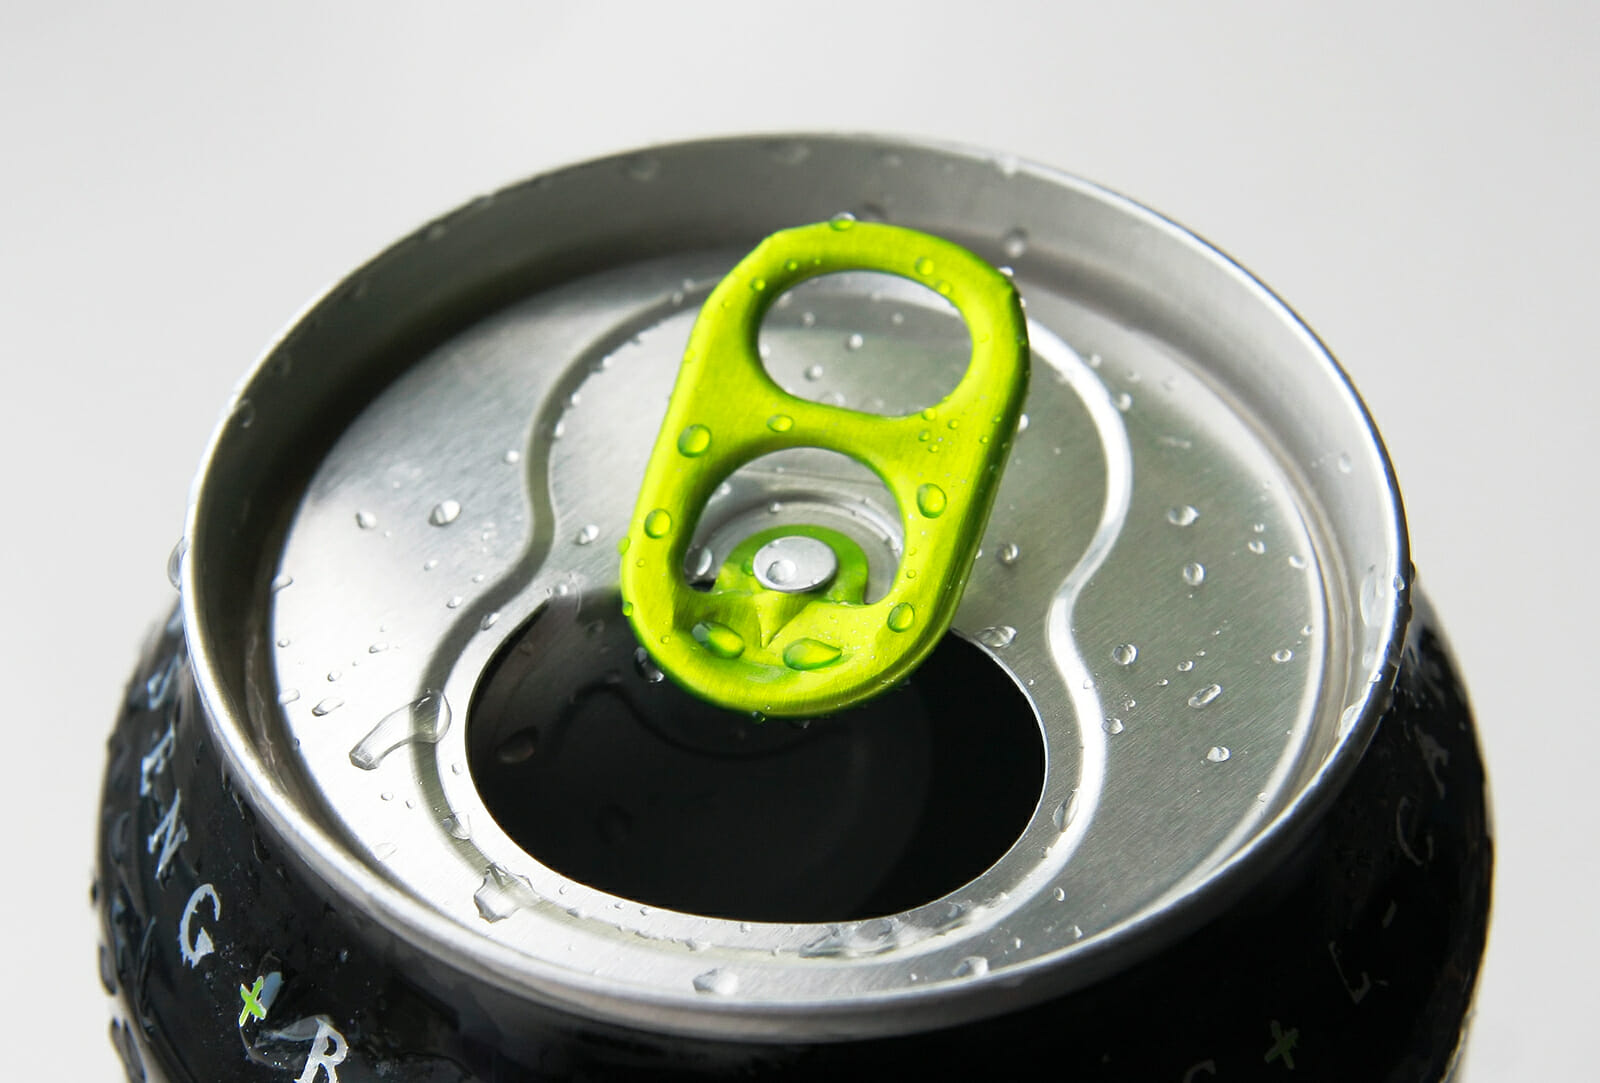 Energy drinks' non-caffeine ingredients may affect heart